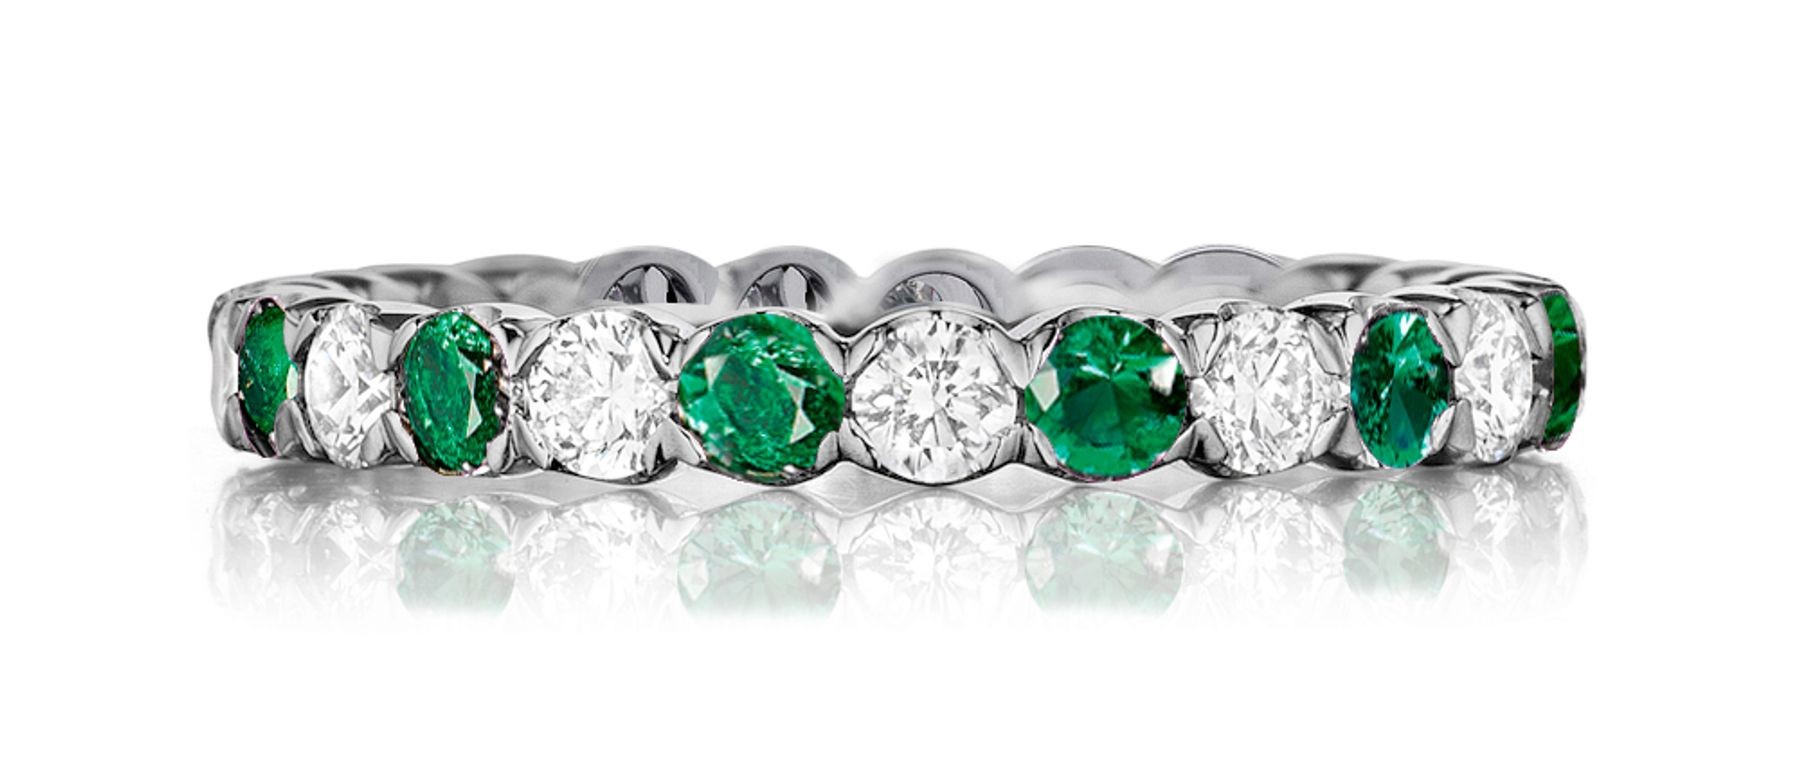 Made To Order Just For You Round Green Emerald & Diamond Prong Set Eternity Wedding Band Rings